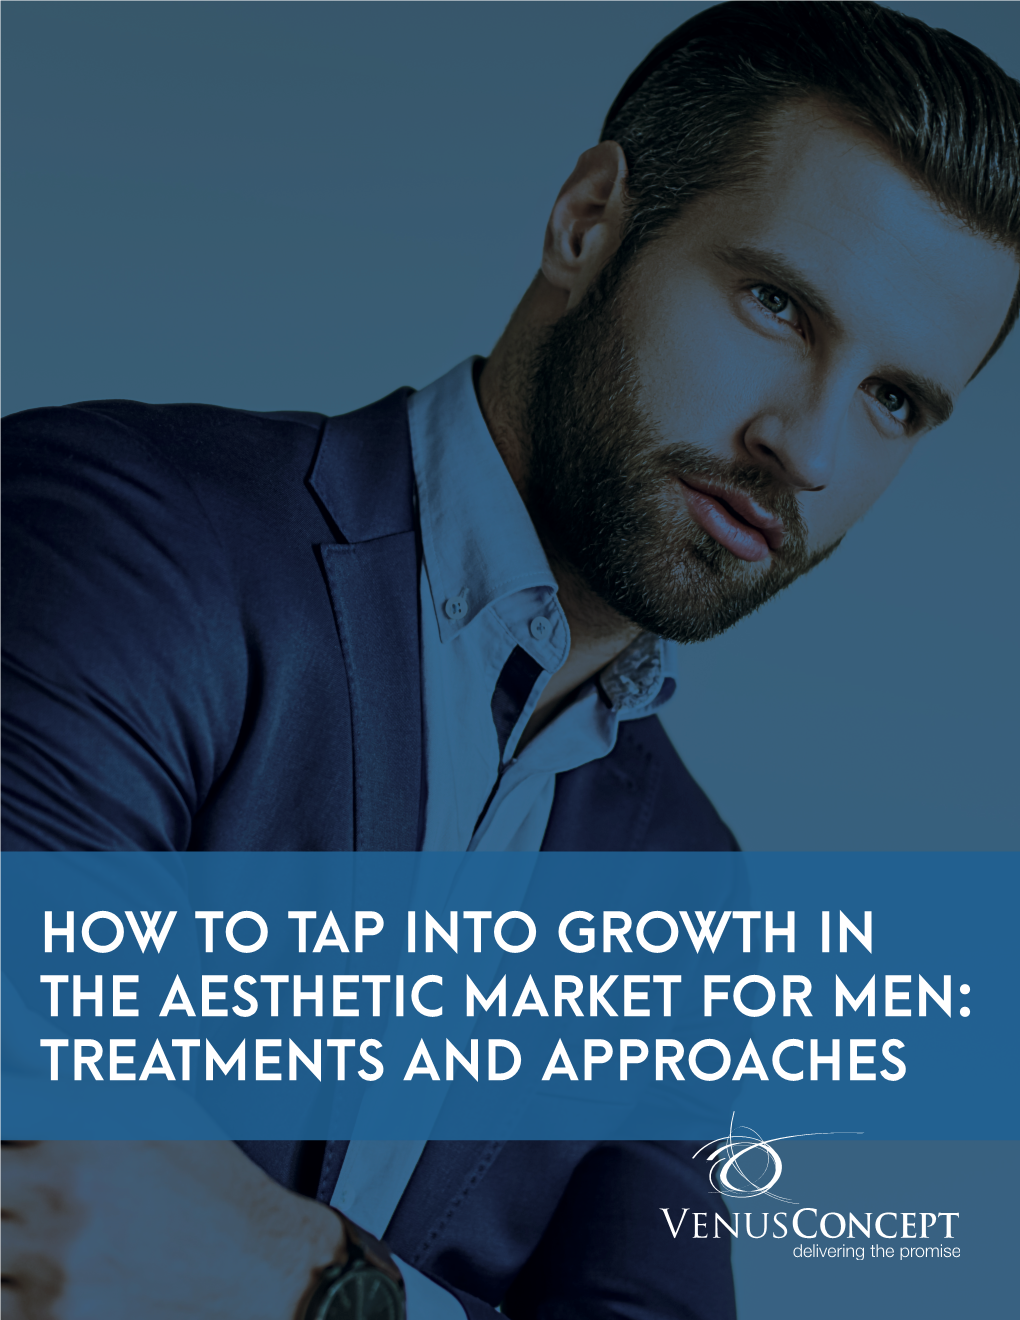 How to Tap Into Growth in the Aesthetic Market for Men